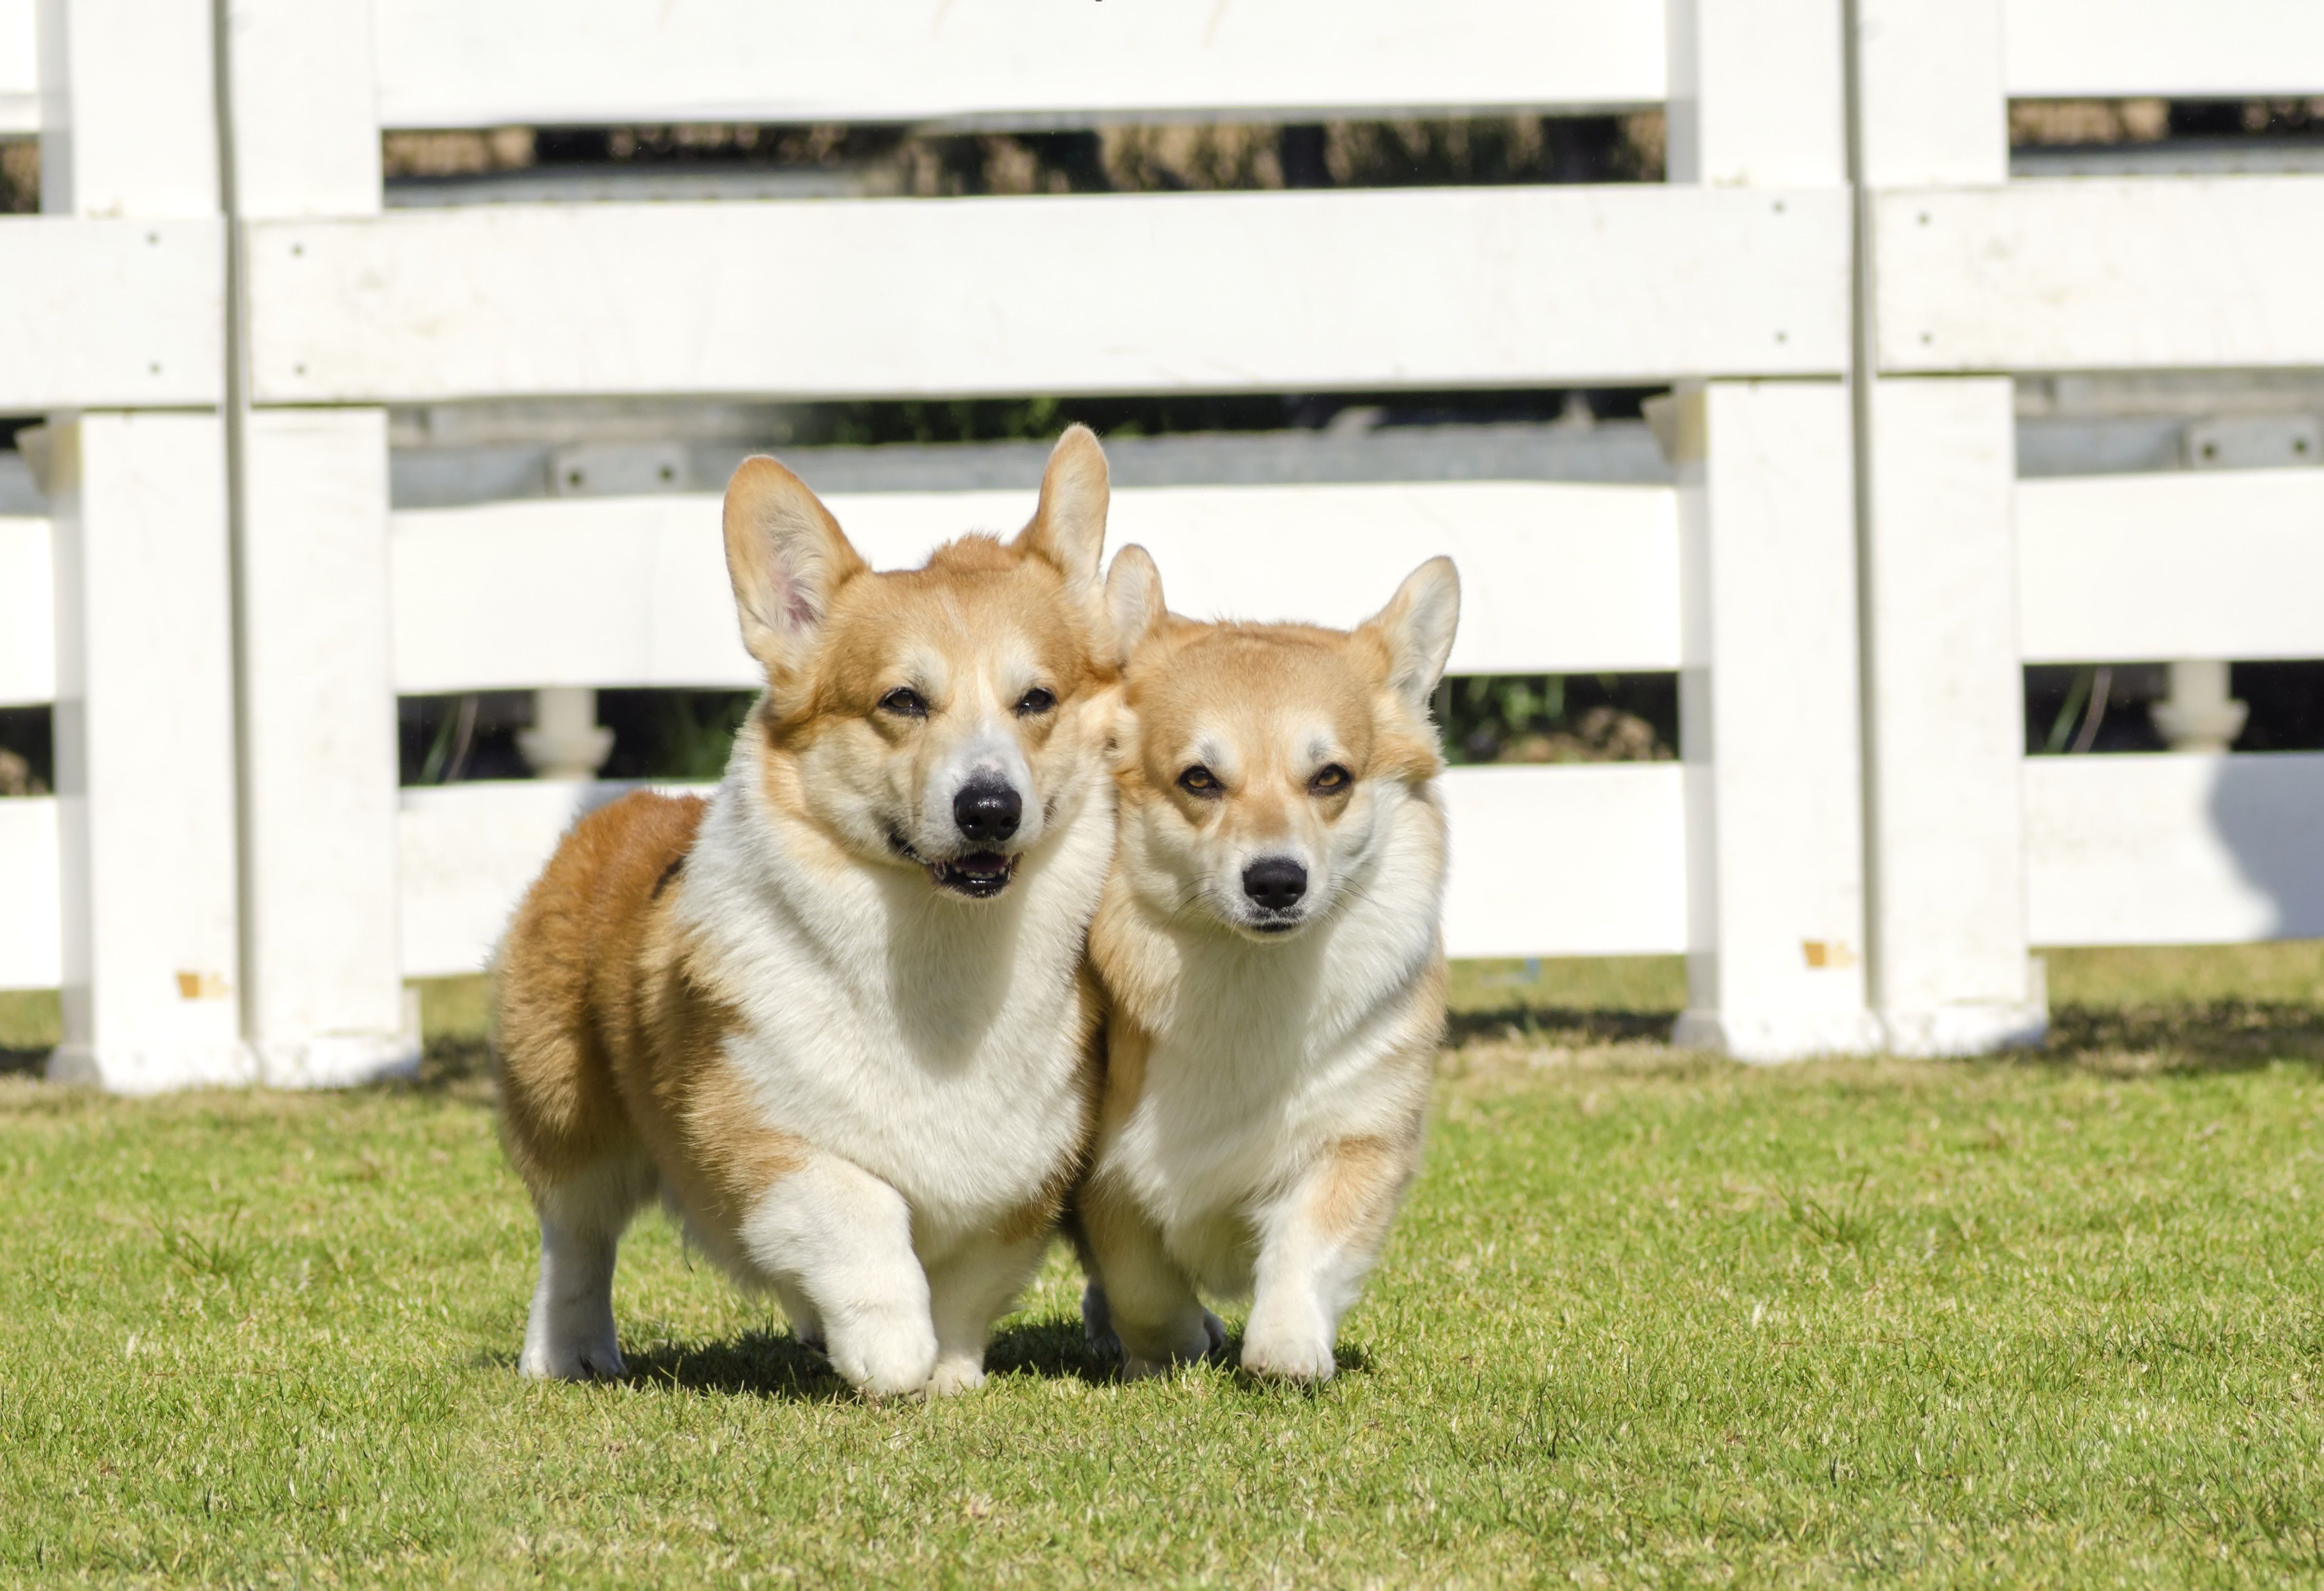 Two young, healthy, beautiful, red sable and white Welsh Corgi Pembroke dogs with a docked tail walking on the grass happily. The Welsh Corgi has short legs, long body, big erect ears and is a herding breed.